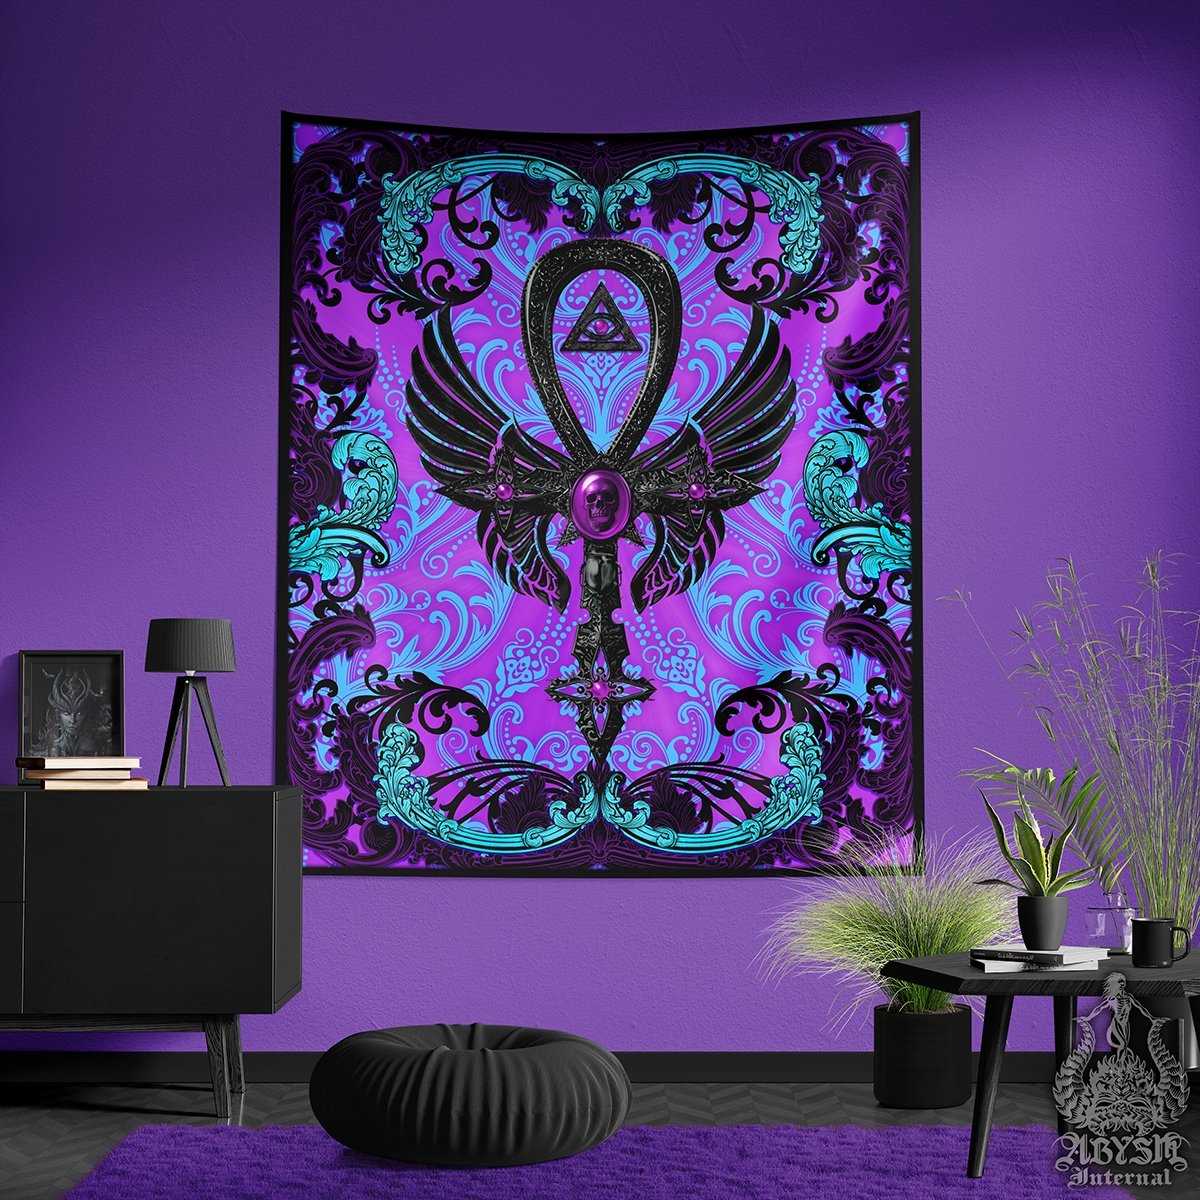 Pastel Goth Tapestry, Gothic Wall Hanging, Occult Home Decor, Art Print - Ankh Cross, Black - Abysm Internal